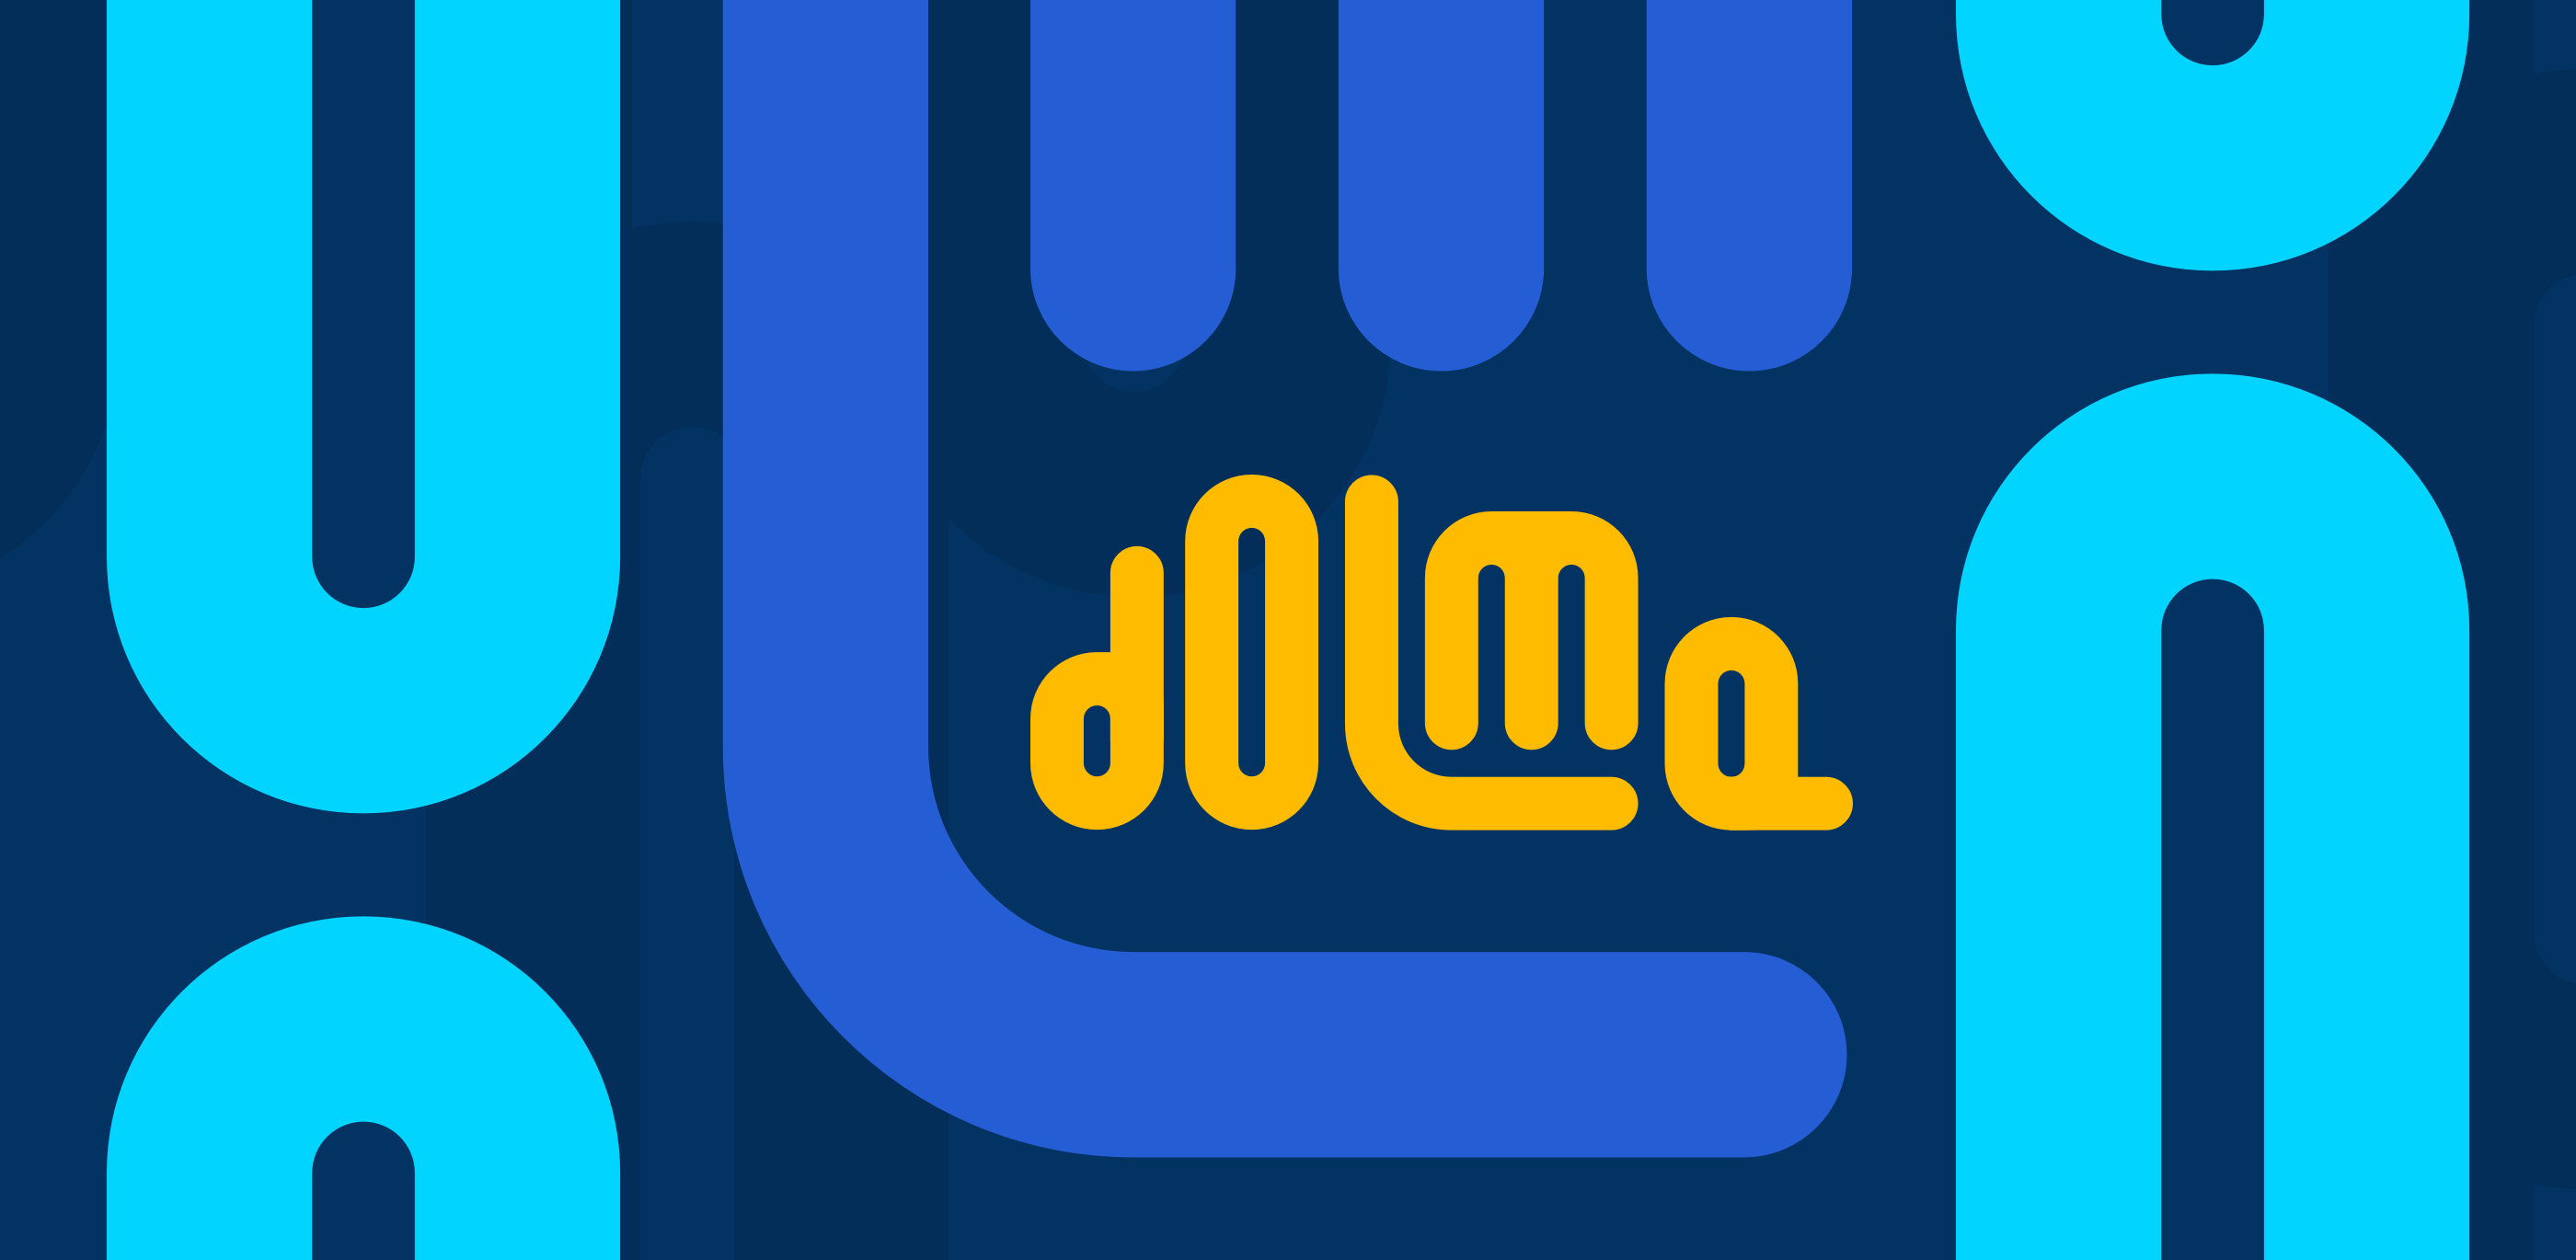 Dolma's official logo. It's dolma written in yellow, round lowercase letters over a blue background.